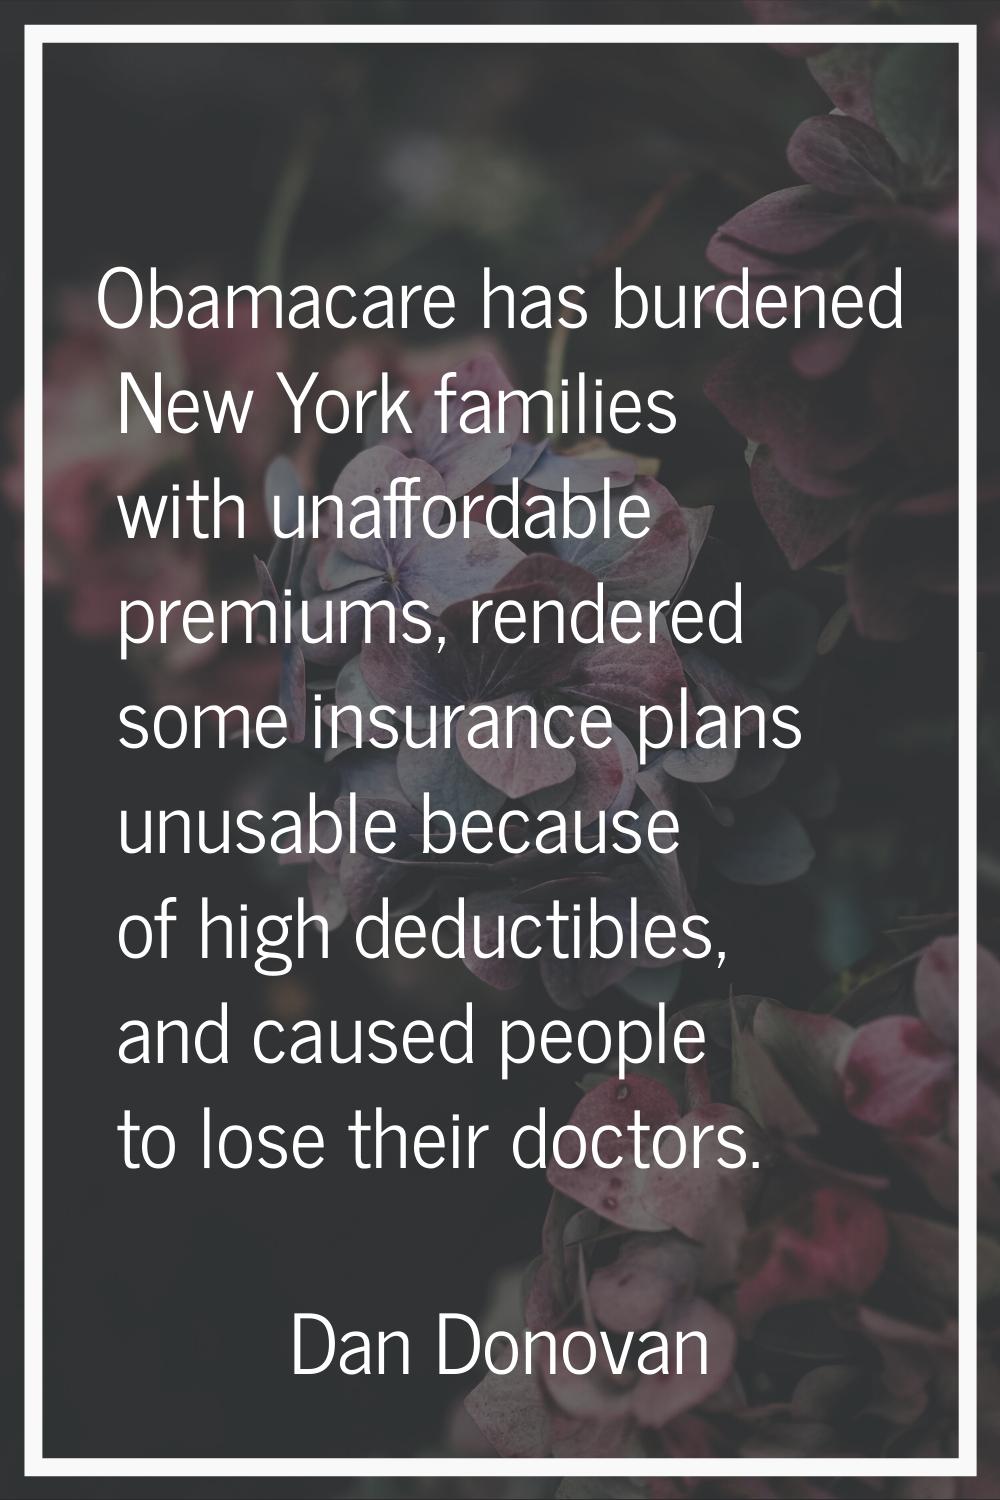 Obamacare has burdened New York families with unaffordable premiums, rendered some insurance plans 